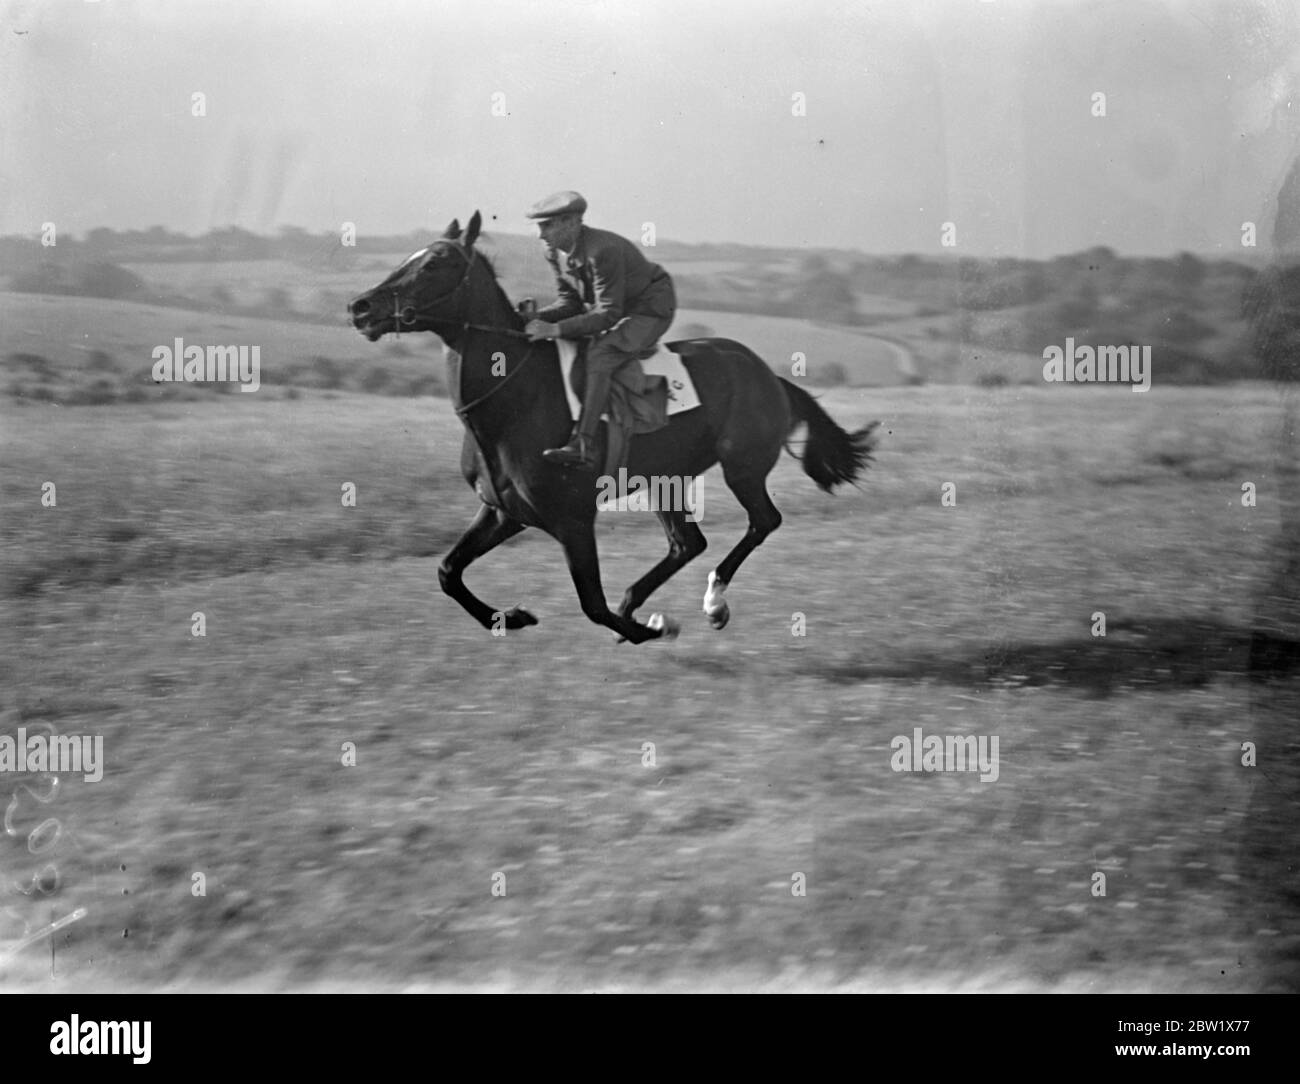 Derby favourites exercised at Epsom. Le Ksar , M E de St Alary's favourite for the Derby, was exercised by a stable lad over the Downs at Epsom with big race to be run on Wednesday. Photo shows, Le Ksar out for exercise at Epsom. 31 May 1937 Stock Photo